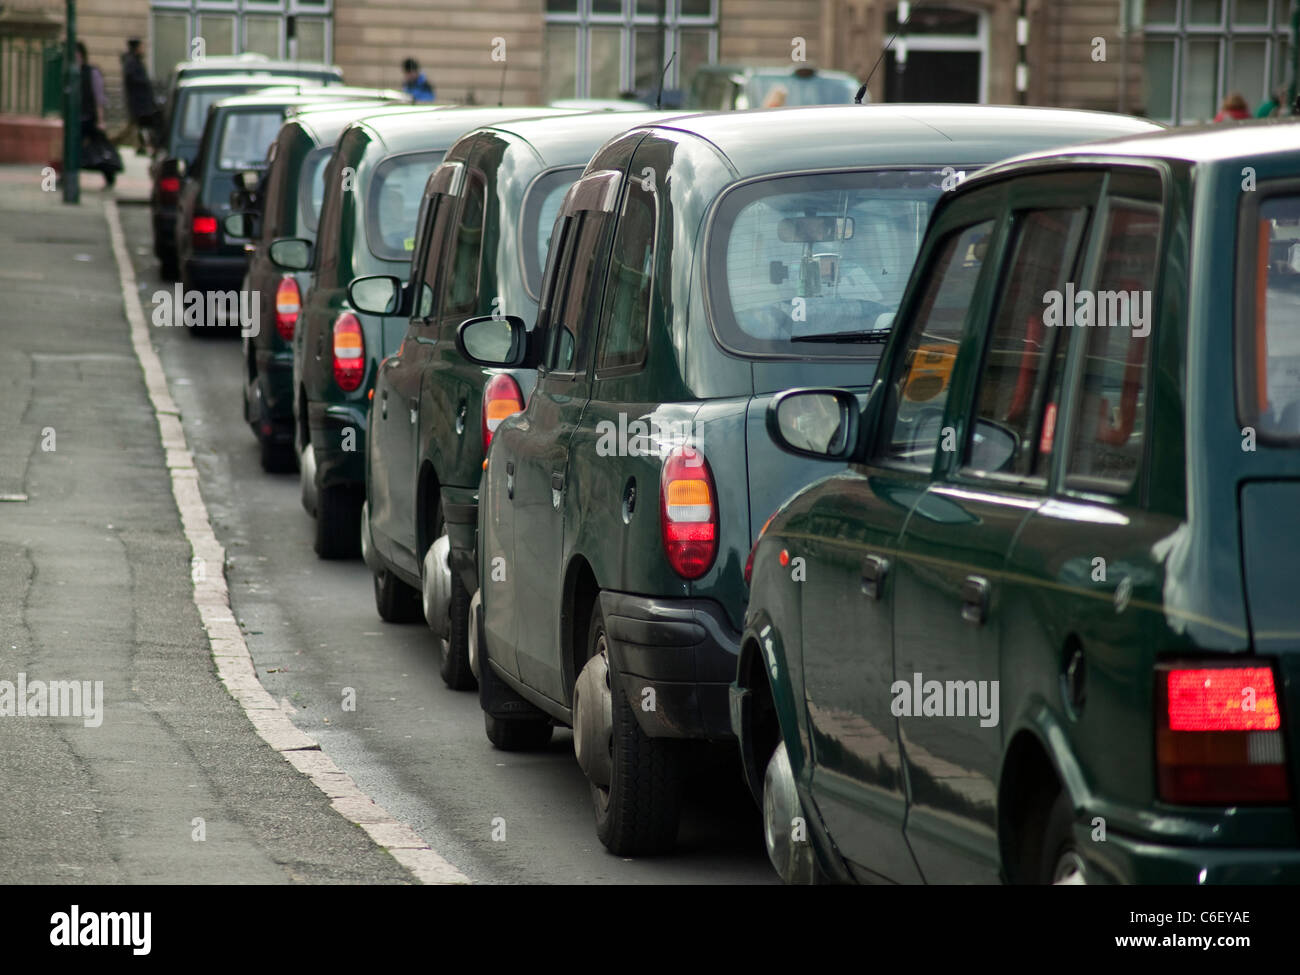 Line up of taxis in a rank Stock Photo